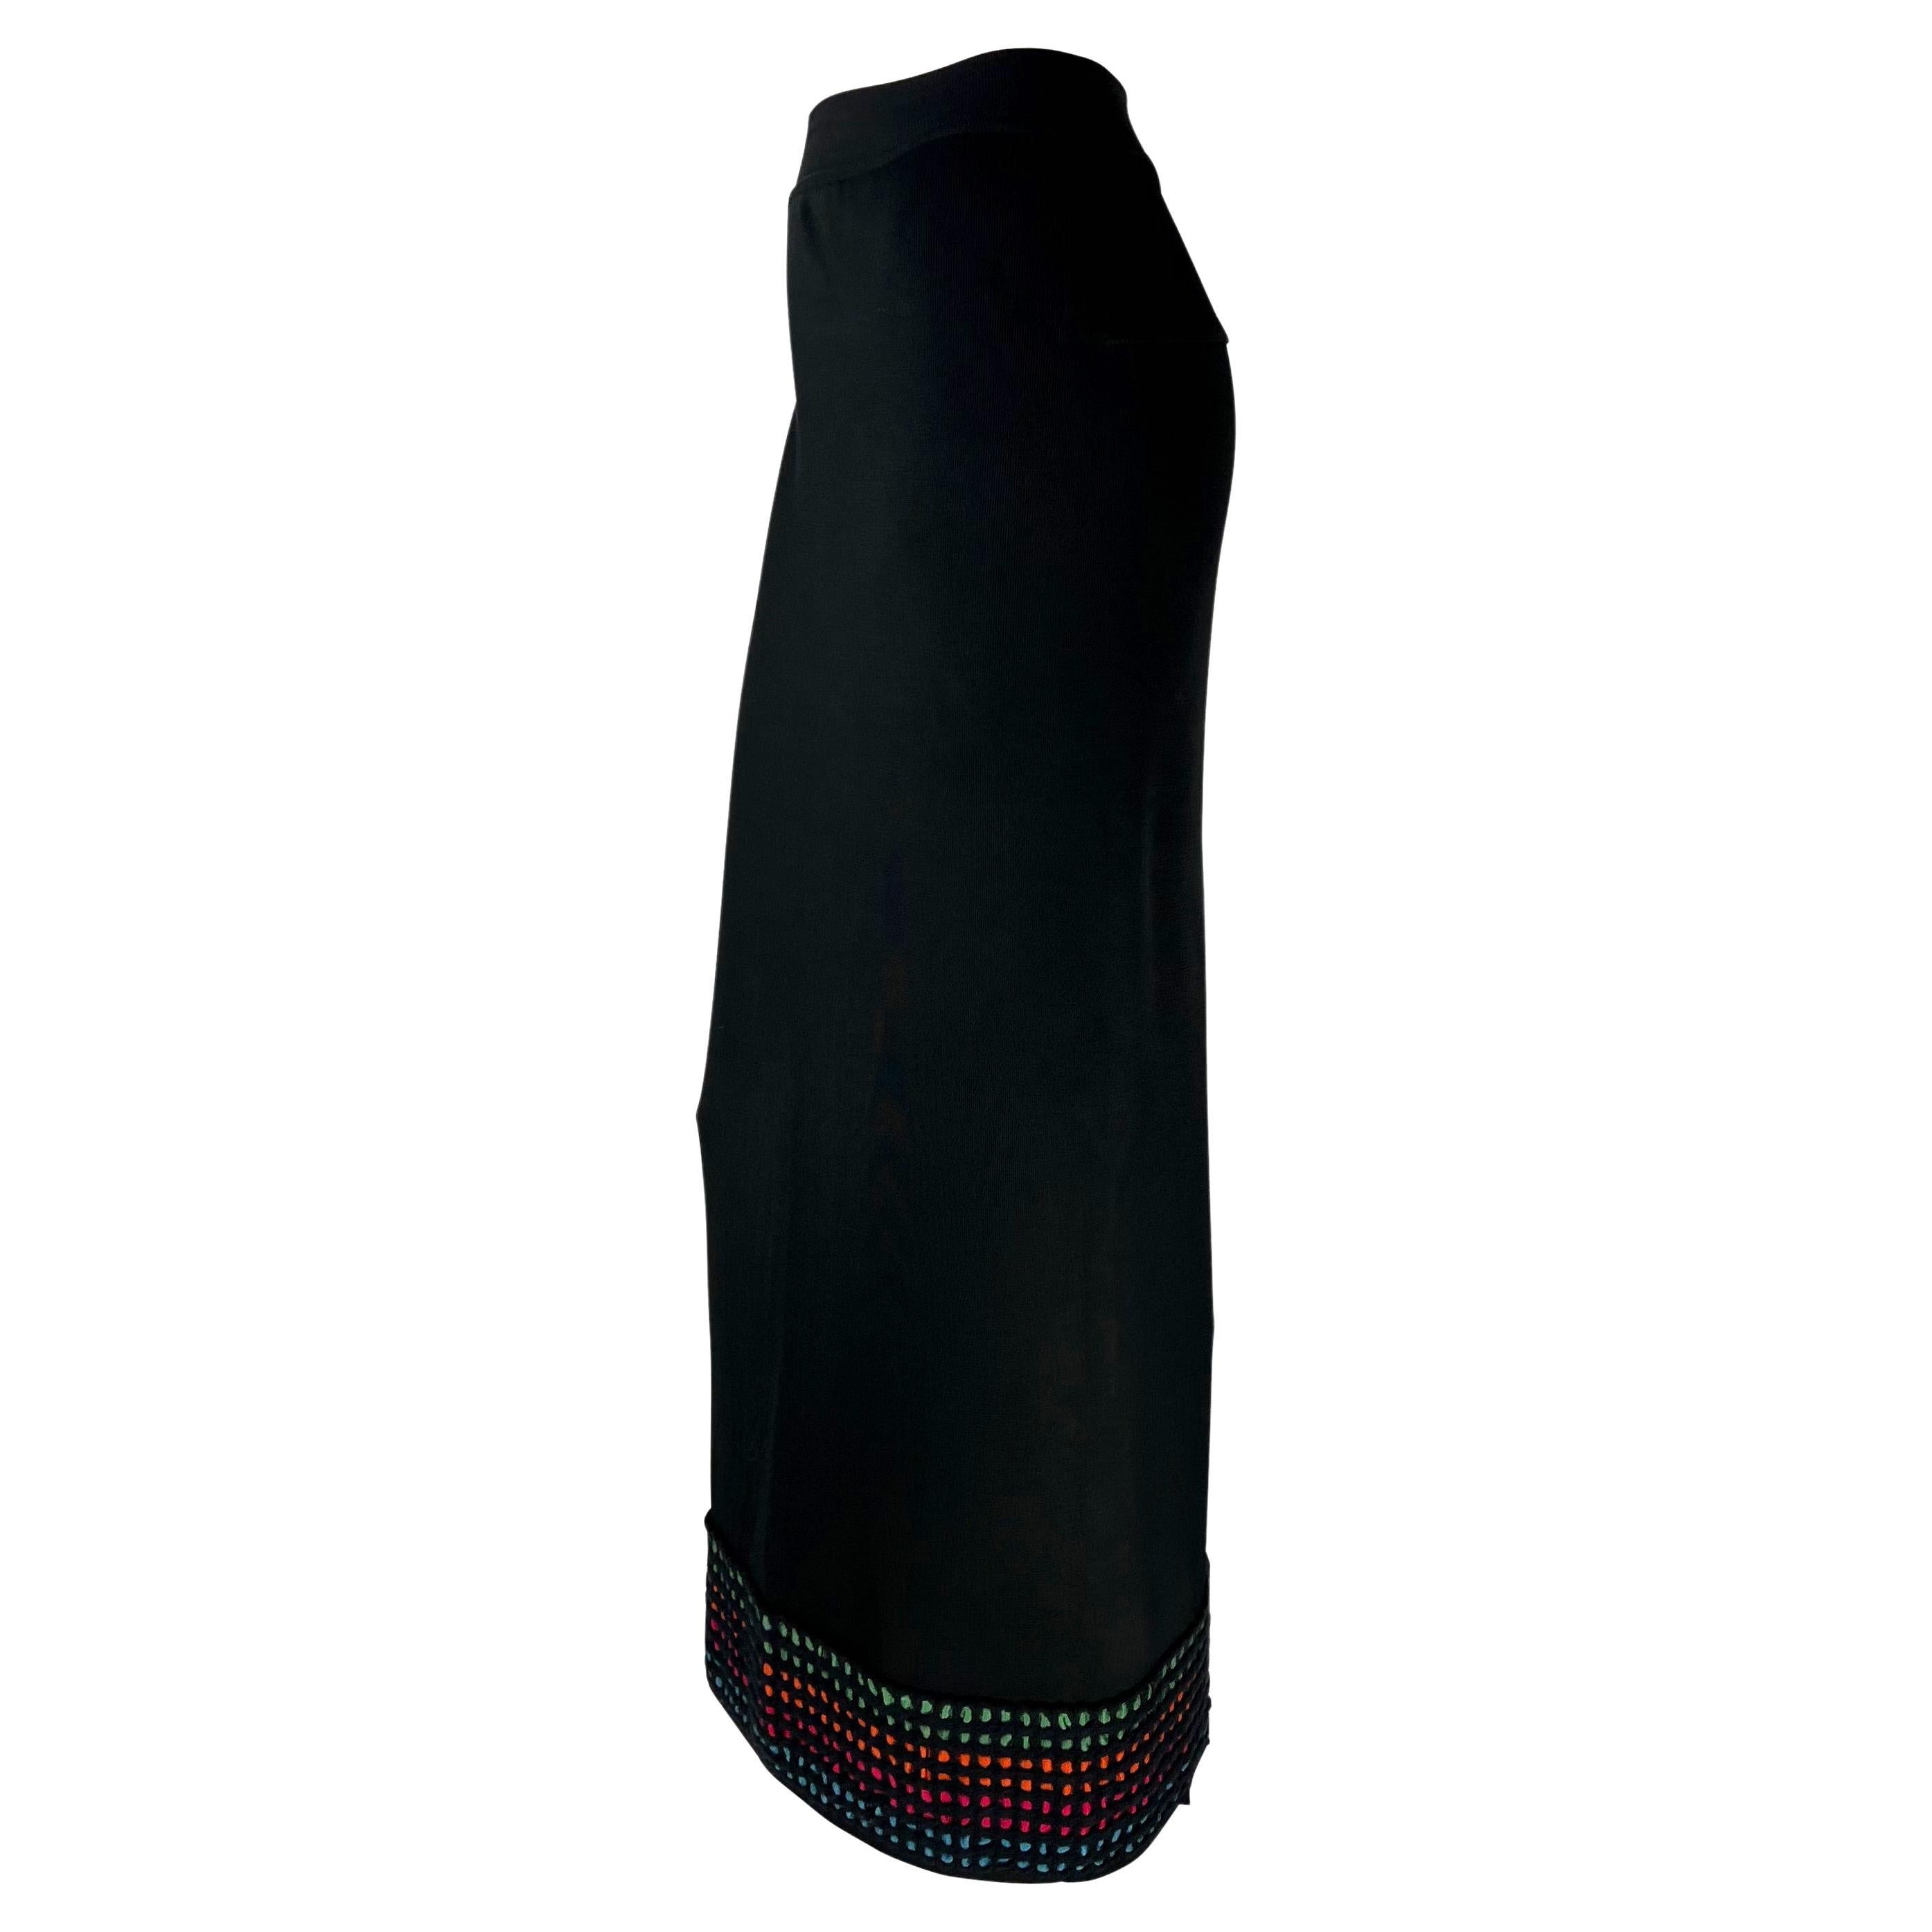 Presenting a chic black knit Azzedine Alaïa maxi skirt. From the mid 1990s, this chic black skirt perfectly clings to the body. The nearly floor-length skirt features a slit at the back waist and the hem is made complete with a spotted multi-color